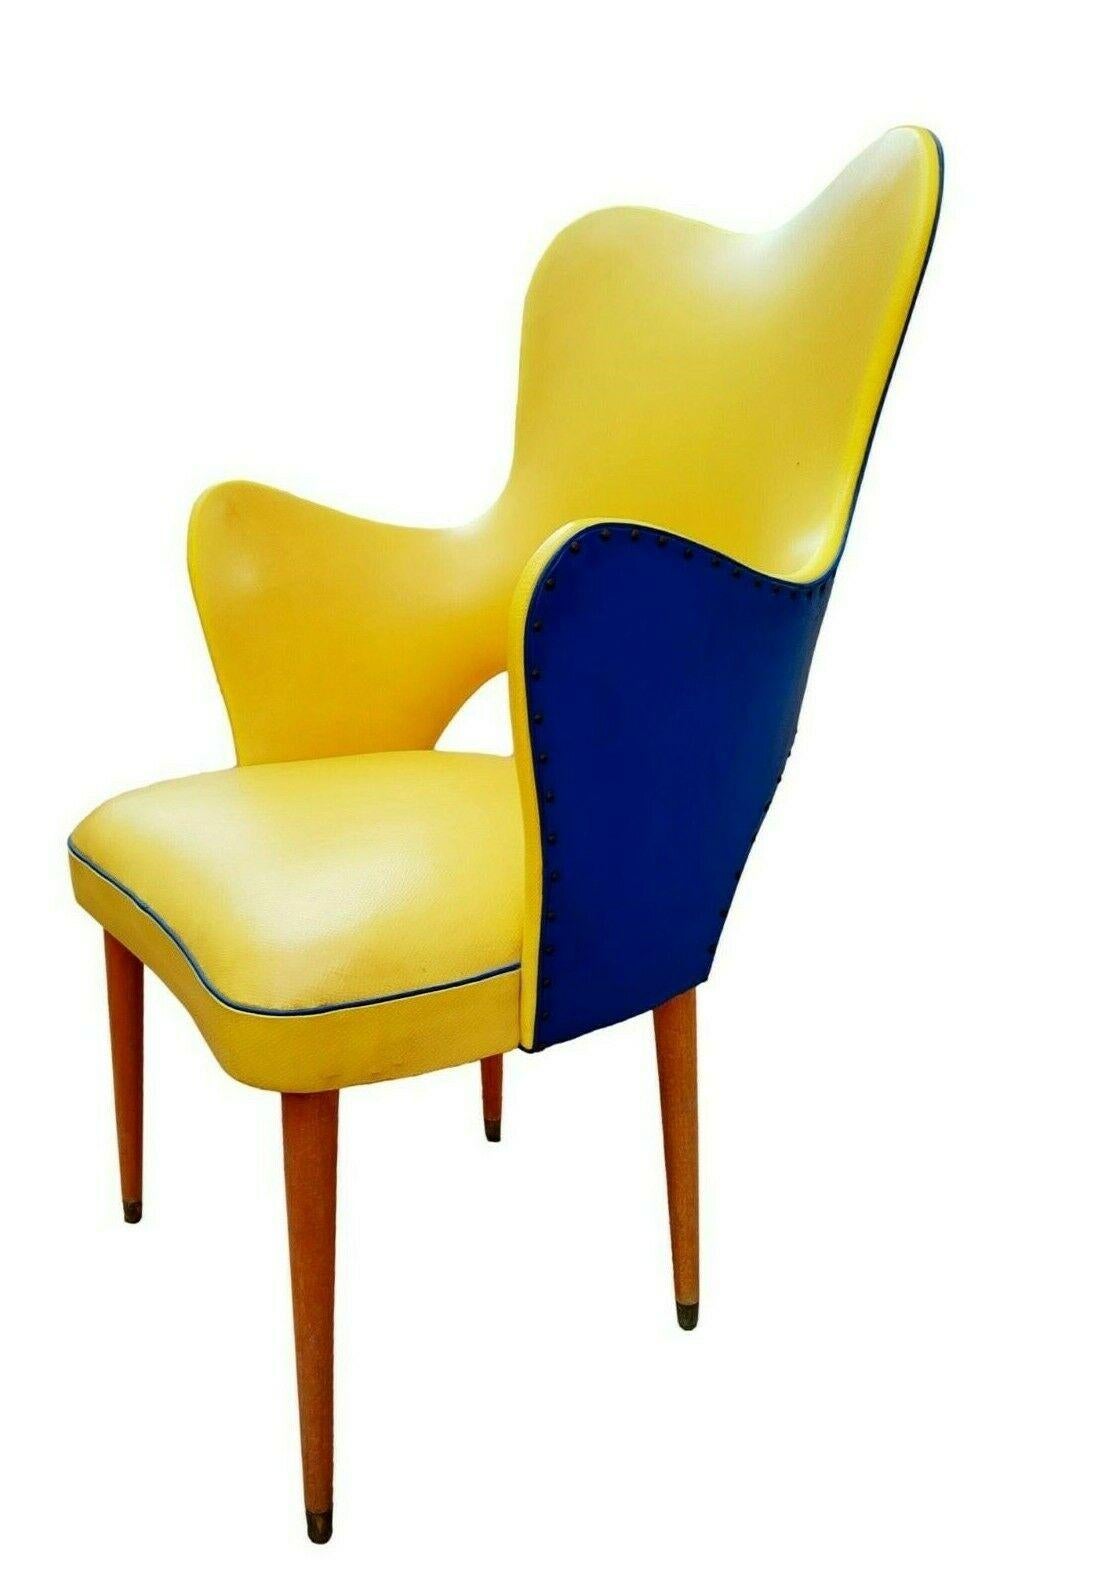 Mid-20th Century Midcentury Two-Tone Armchair in Eco-Leather Attributed to Gastone Rinaldi, 1950 For Sale